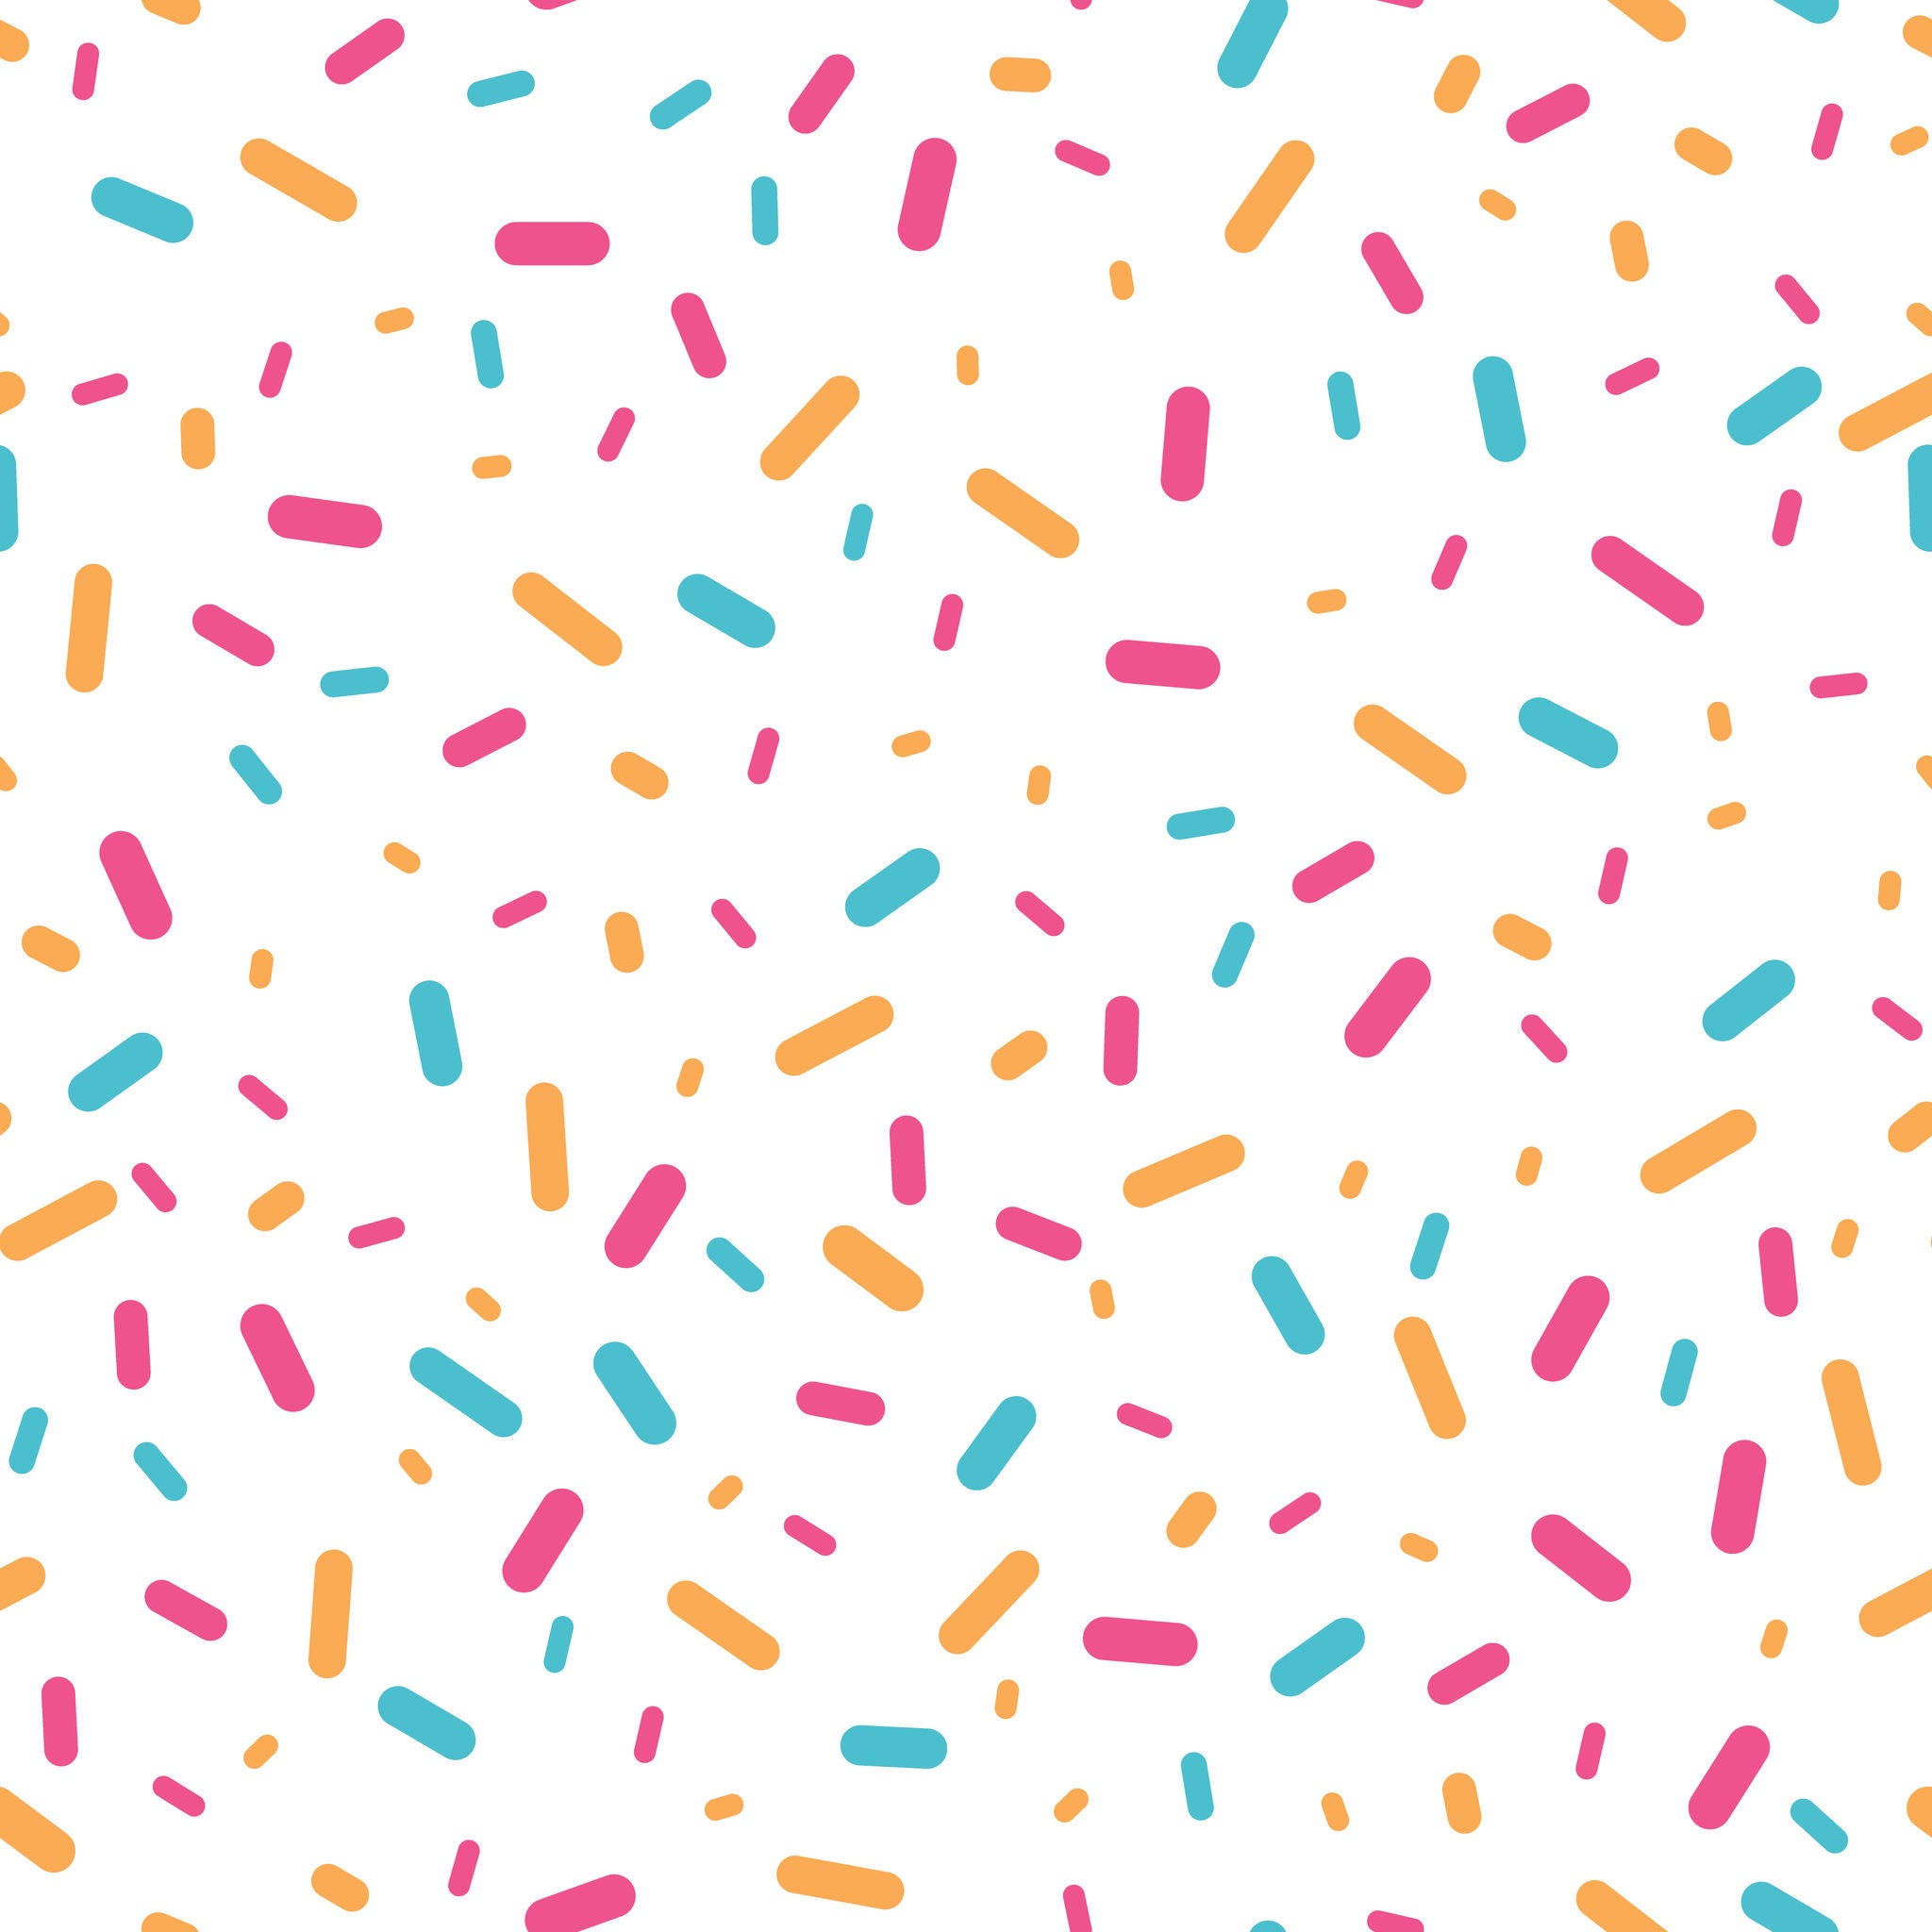 Candy Confetti Sprinkles Heat Transfer Vinyl and Carrier Sheet